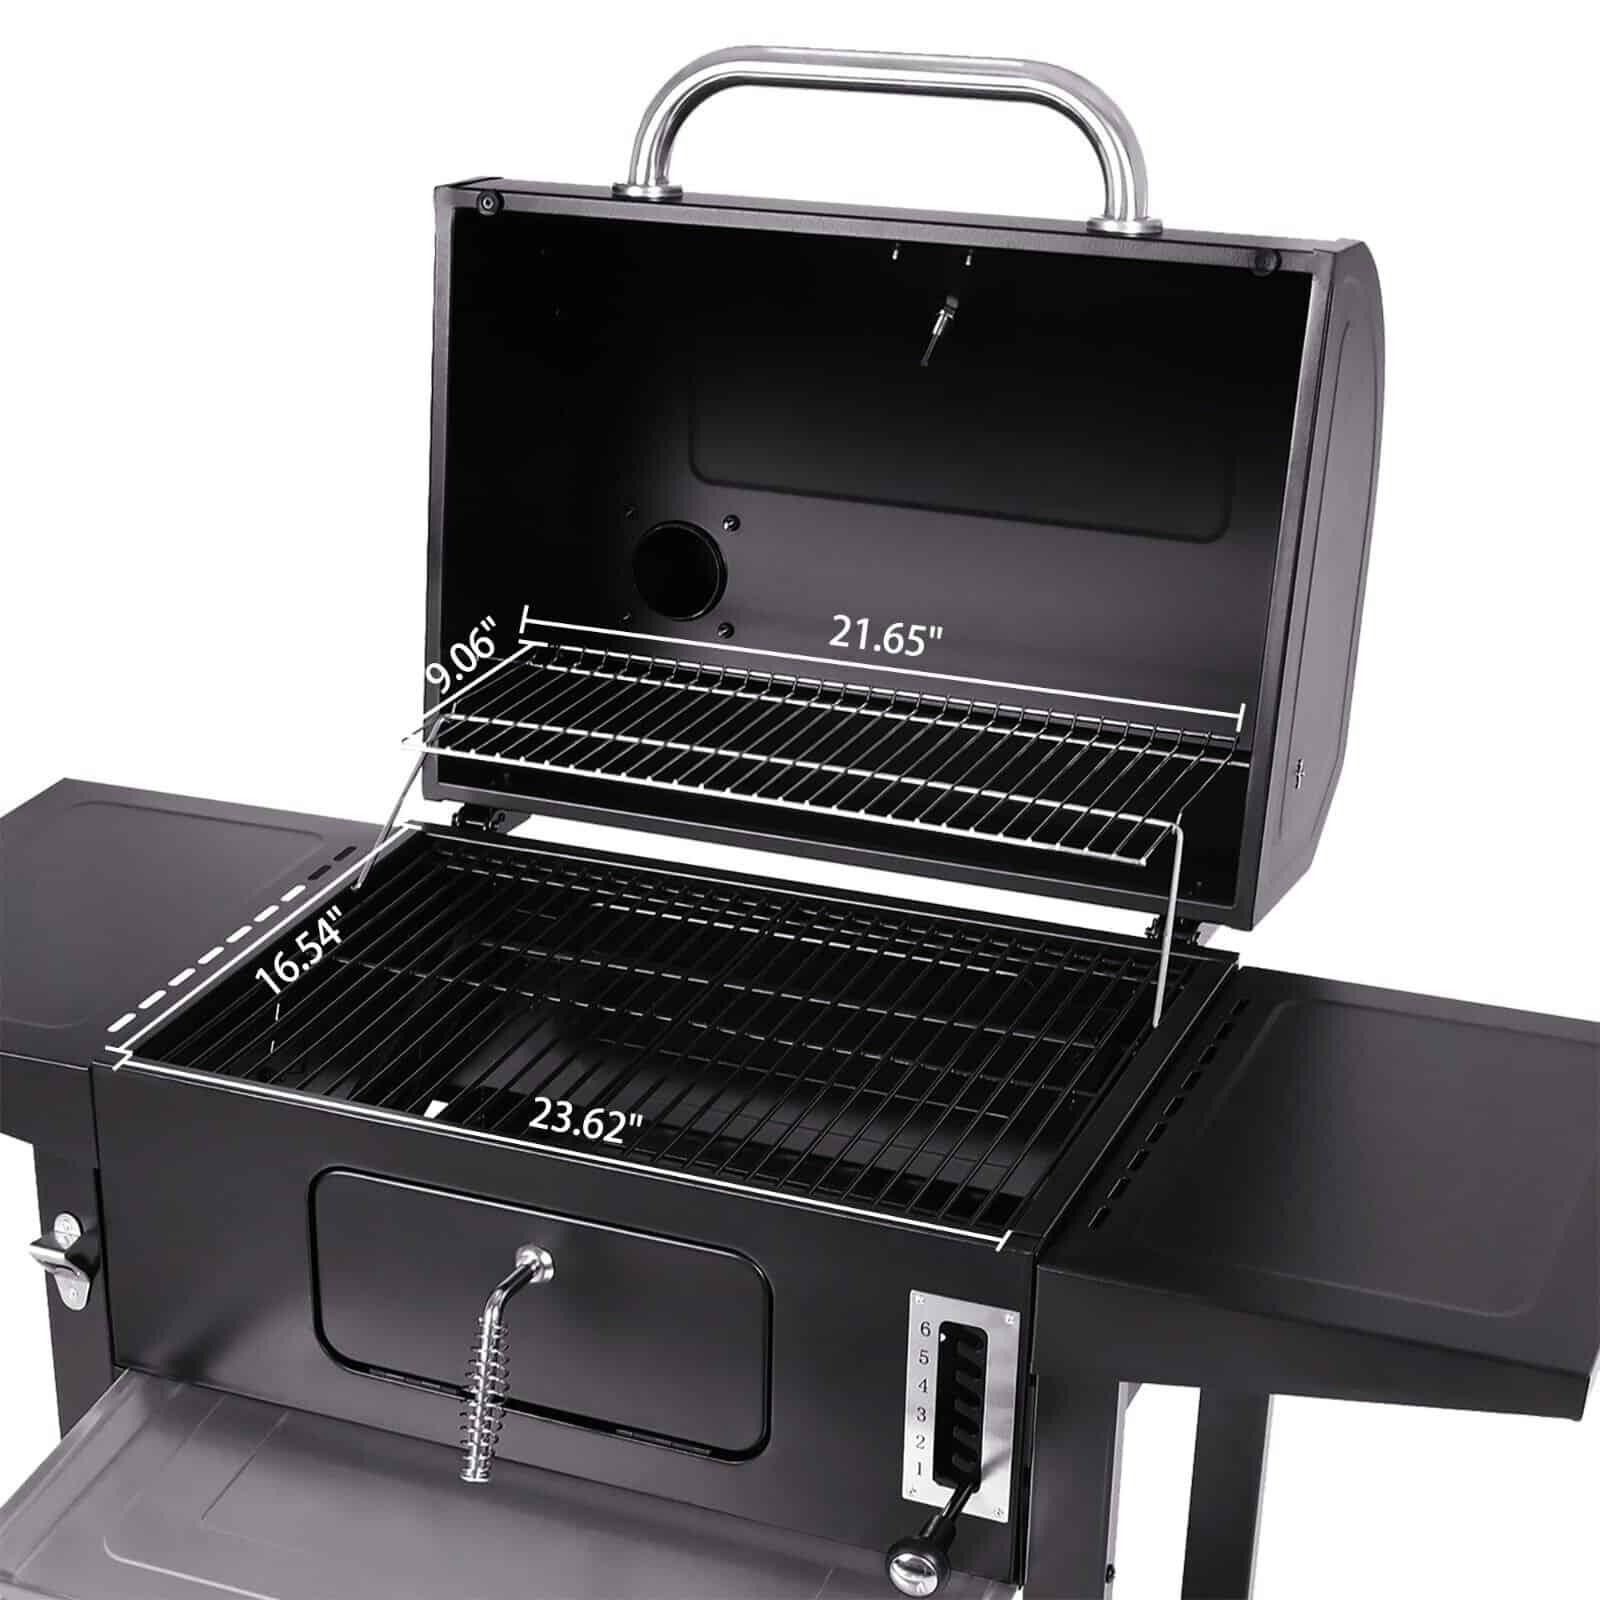 A black barbecue grill with a lid and two burners.